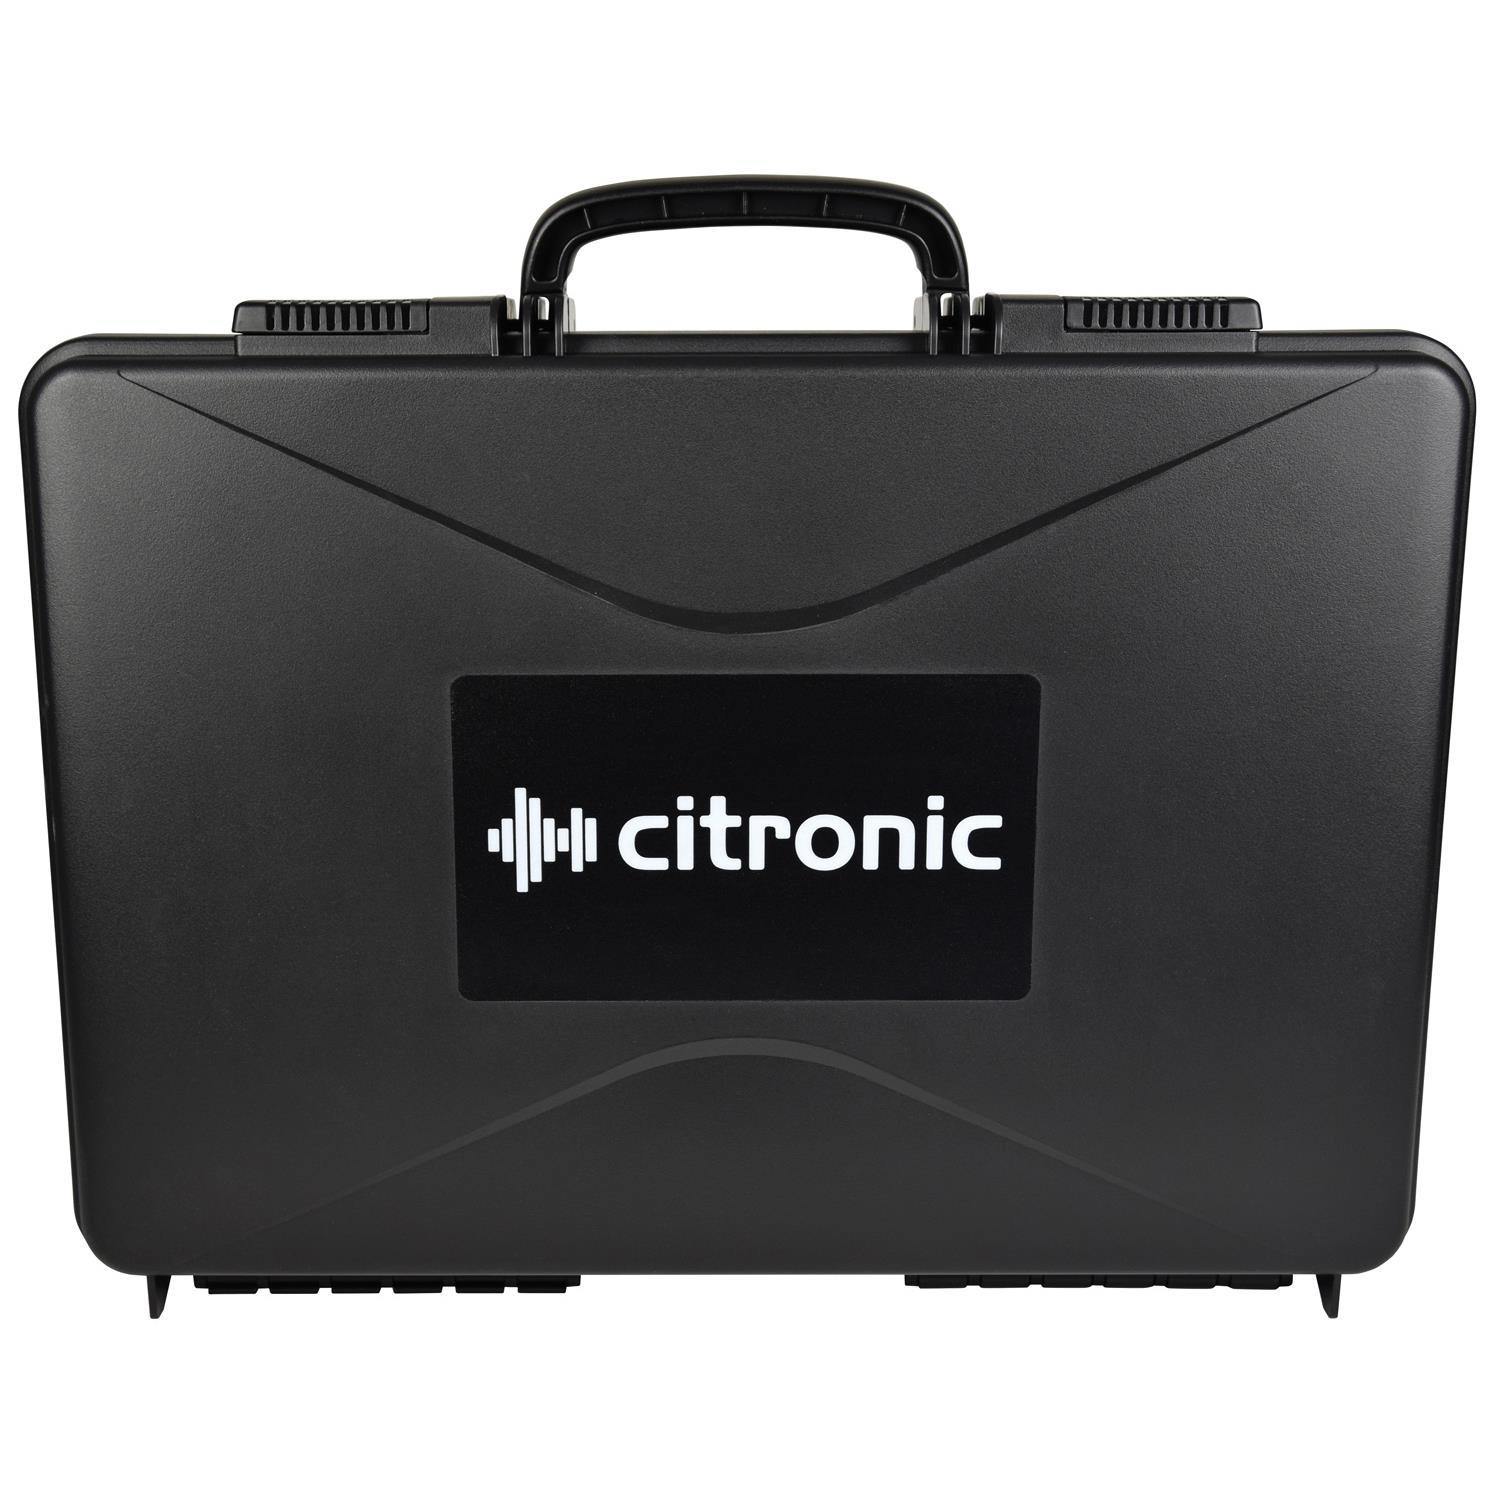 Citronic Small ABS Flightcase for Mixer / Microphone - DY Pro Audio